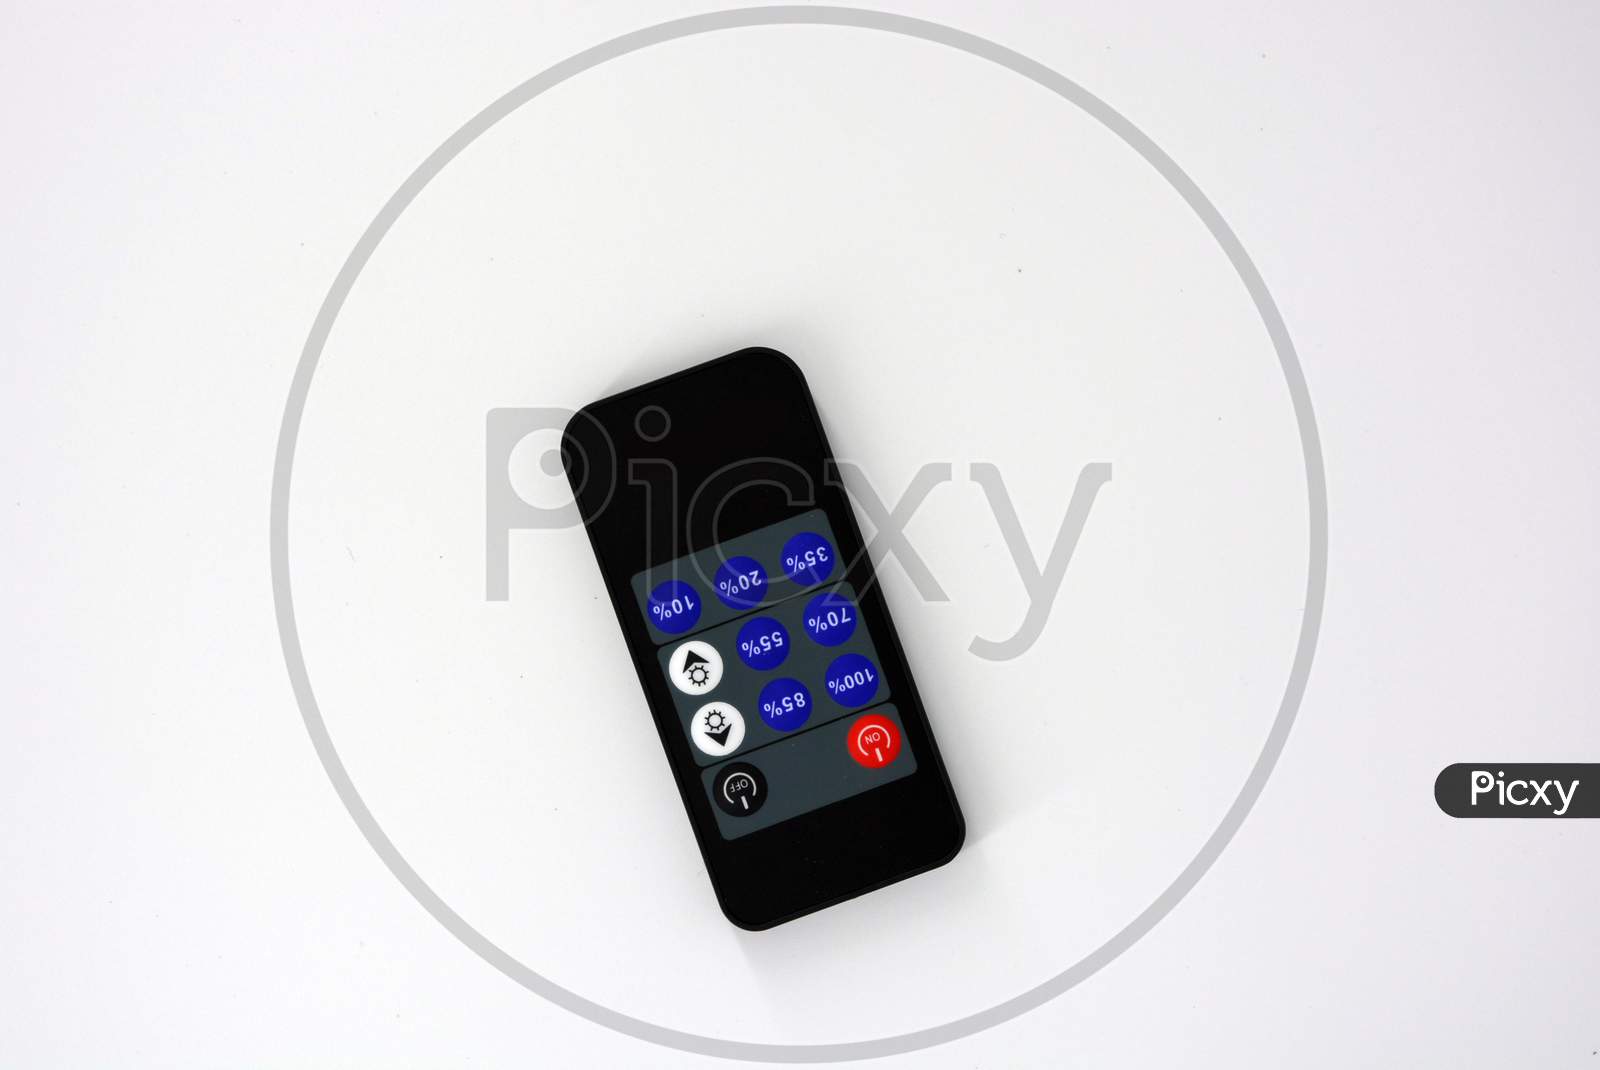 Black plastic radio remote control on batteries with colored buttons located on a white plastic background.